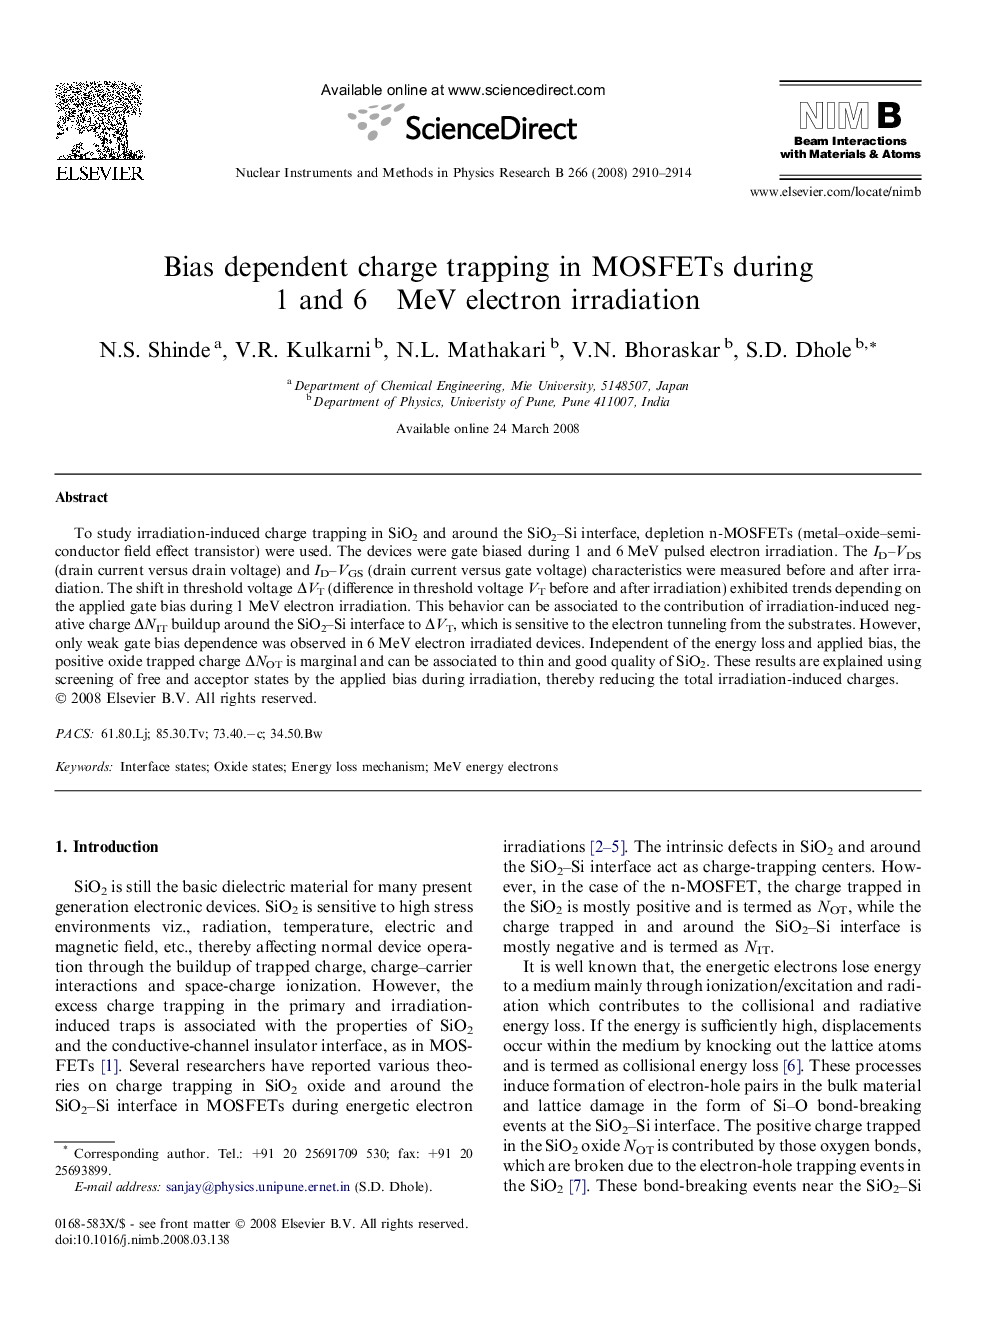 Bias dependent charge trapping in MOSFETs during 1 and 6Â MeV electron irradiation